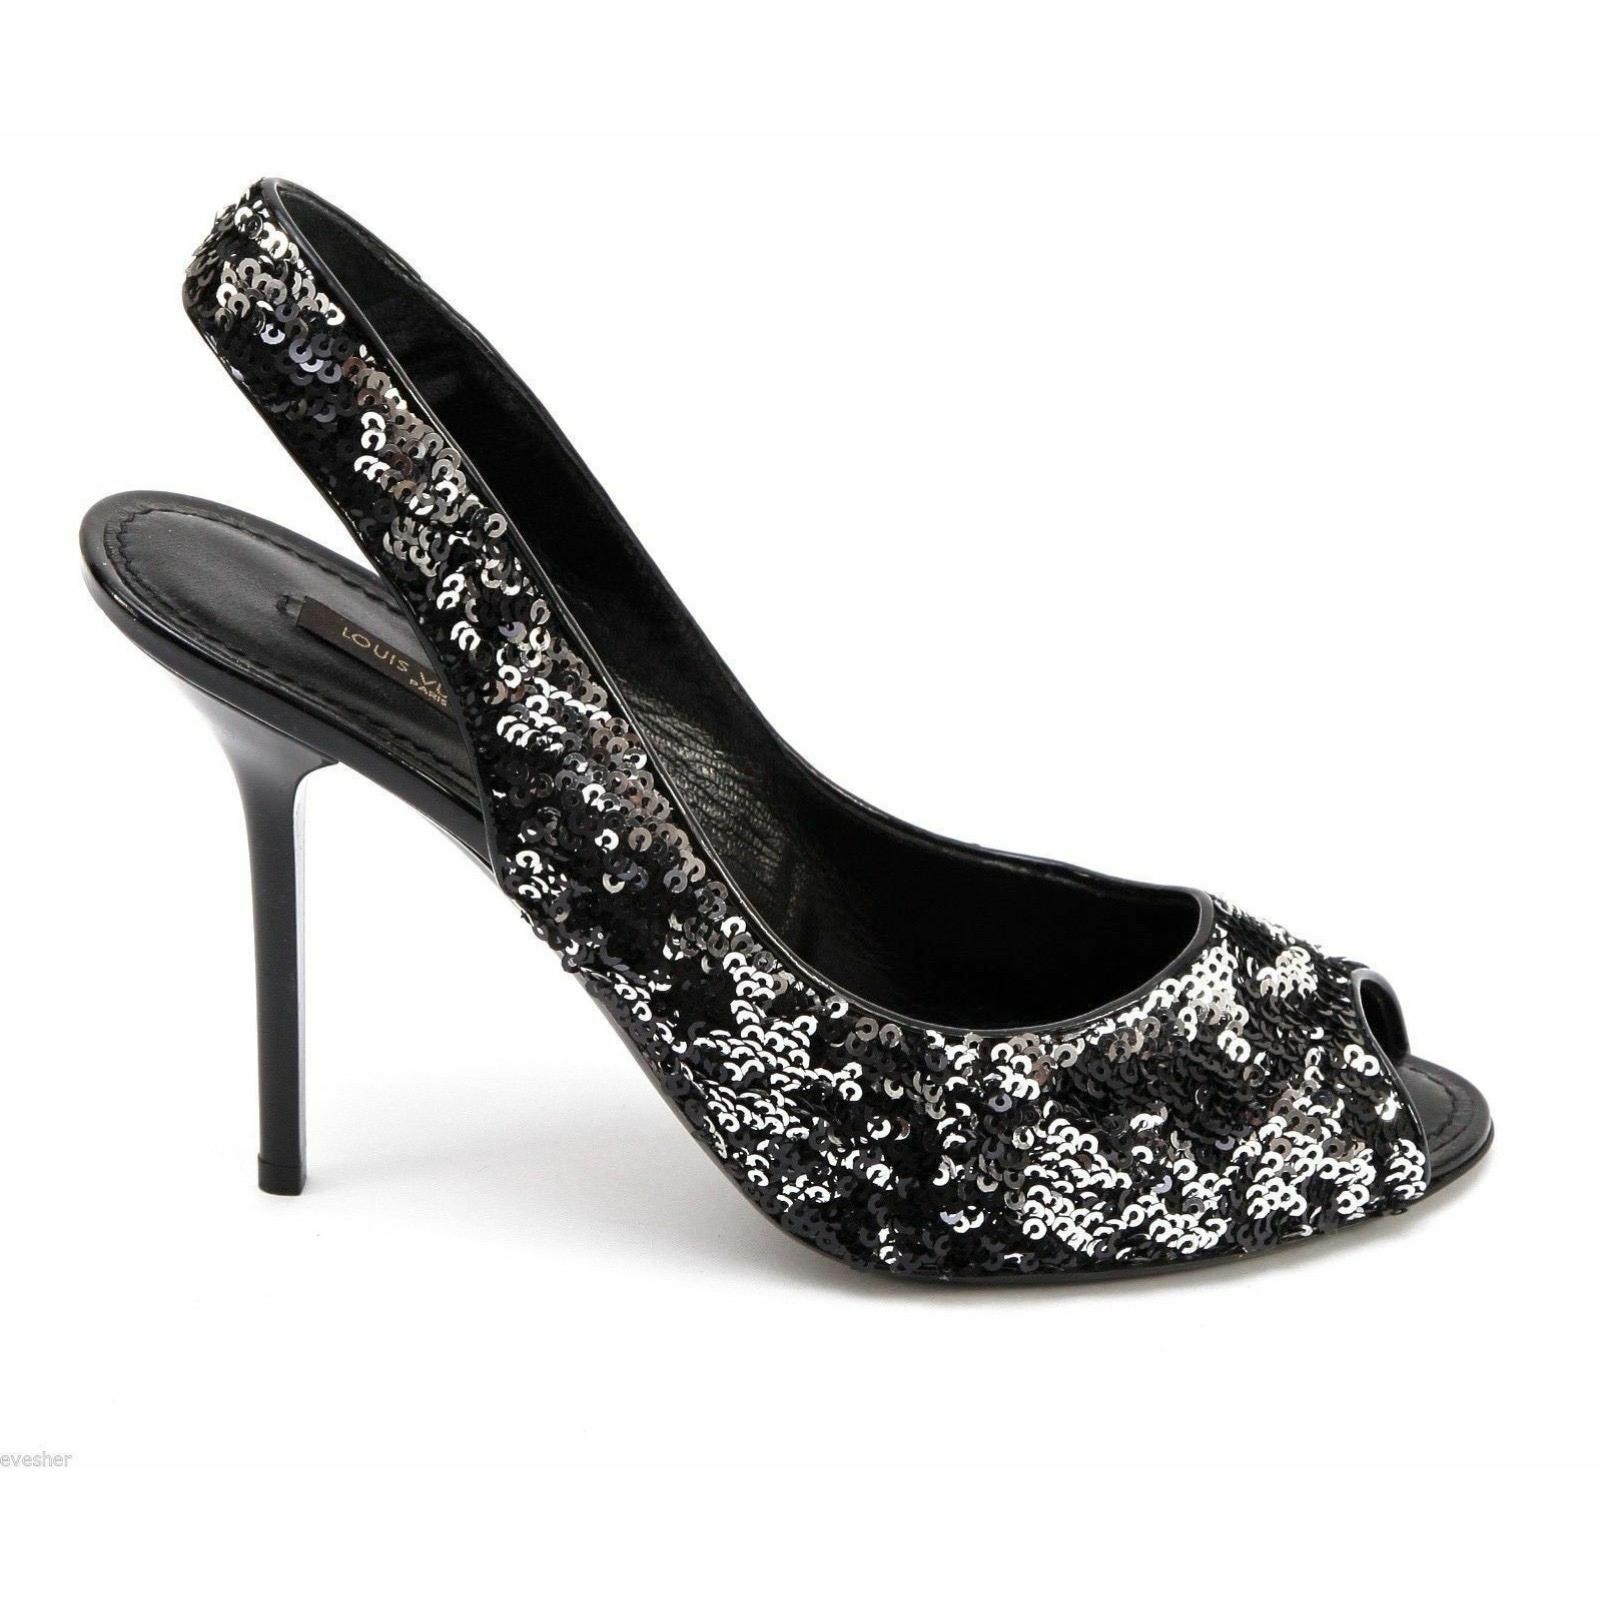 GUARANTEED AUTHENTIC LOUIS VUITTON LIZA SEQUIN SLINGBACK SANDALS


Details:
- Liza style slingback sandal designed in rich black and silver shimmery sequins.
- Peep toe.
- Slingback.
- LV logo engraved at heel.
- Leather lining and sole.
- Comes